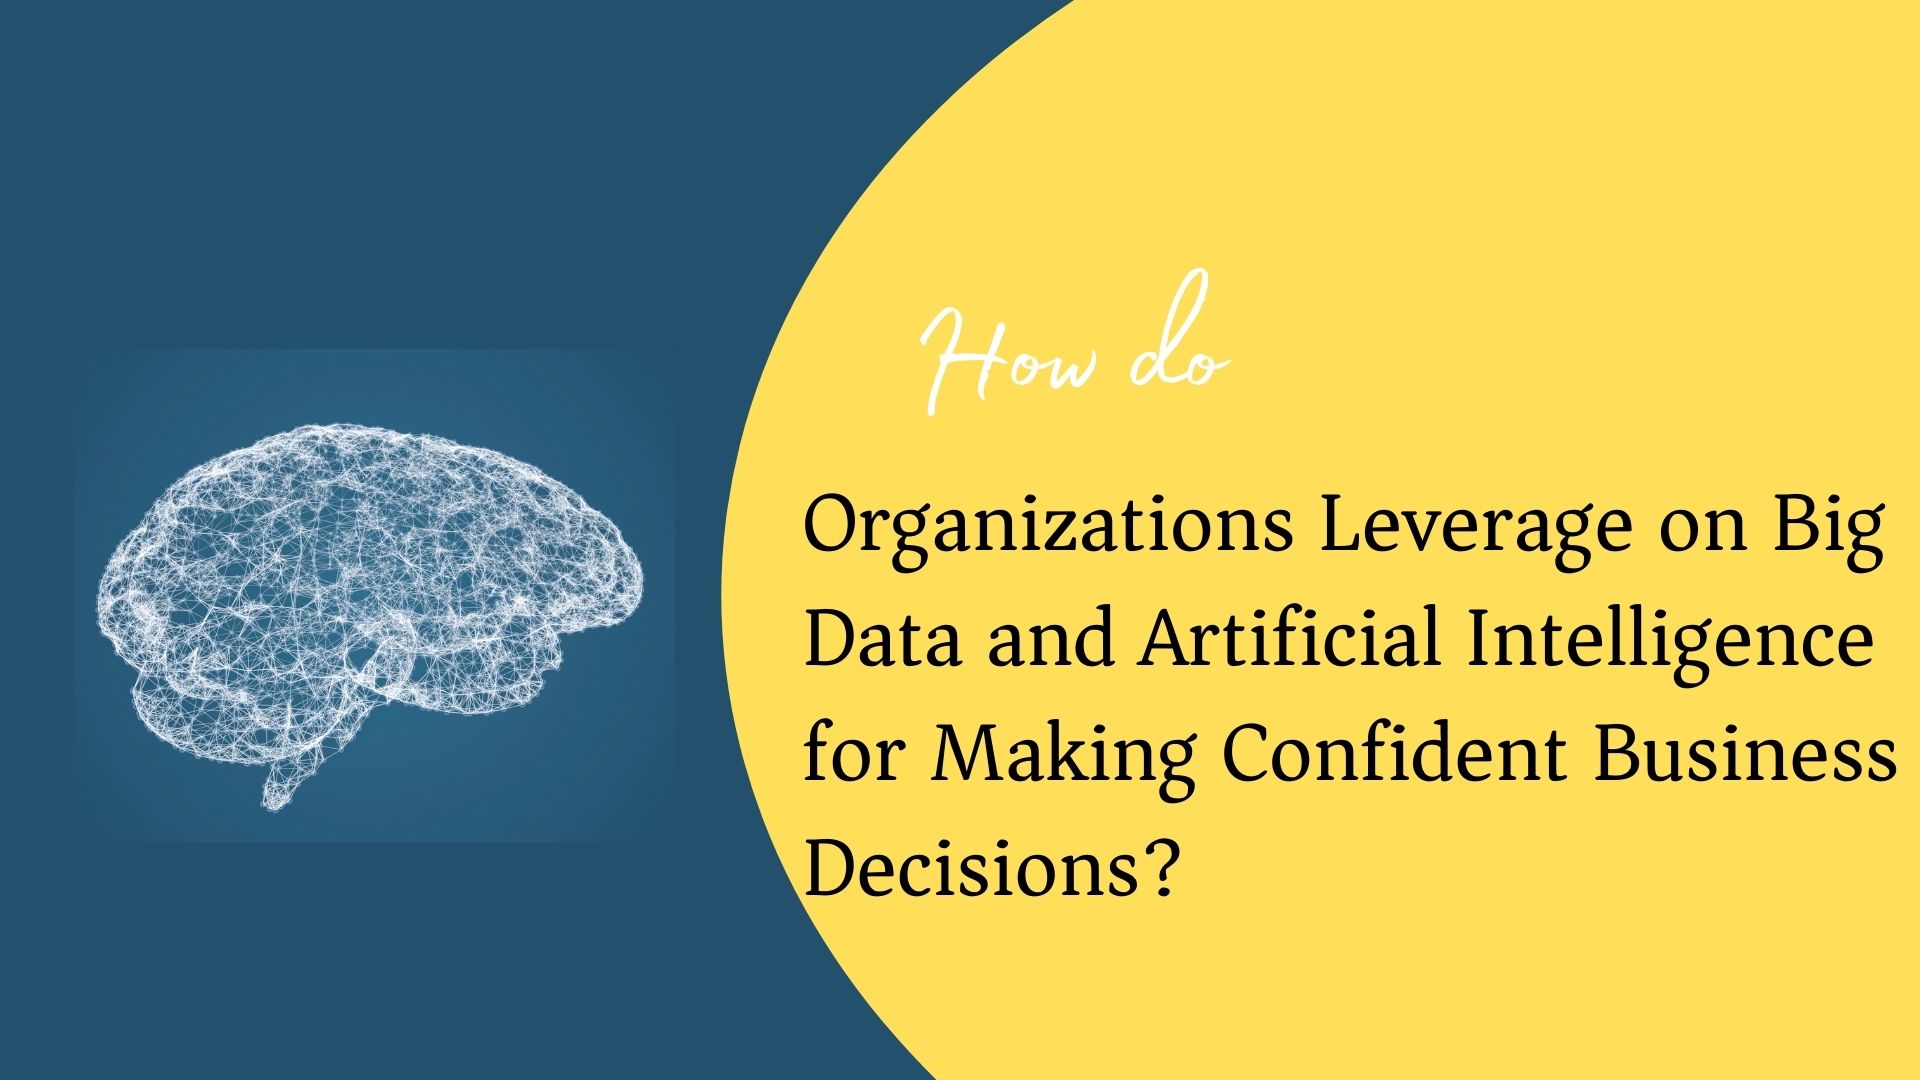 How do Organizations Leverage on Big Data and Artificial